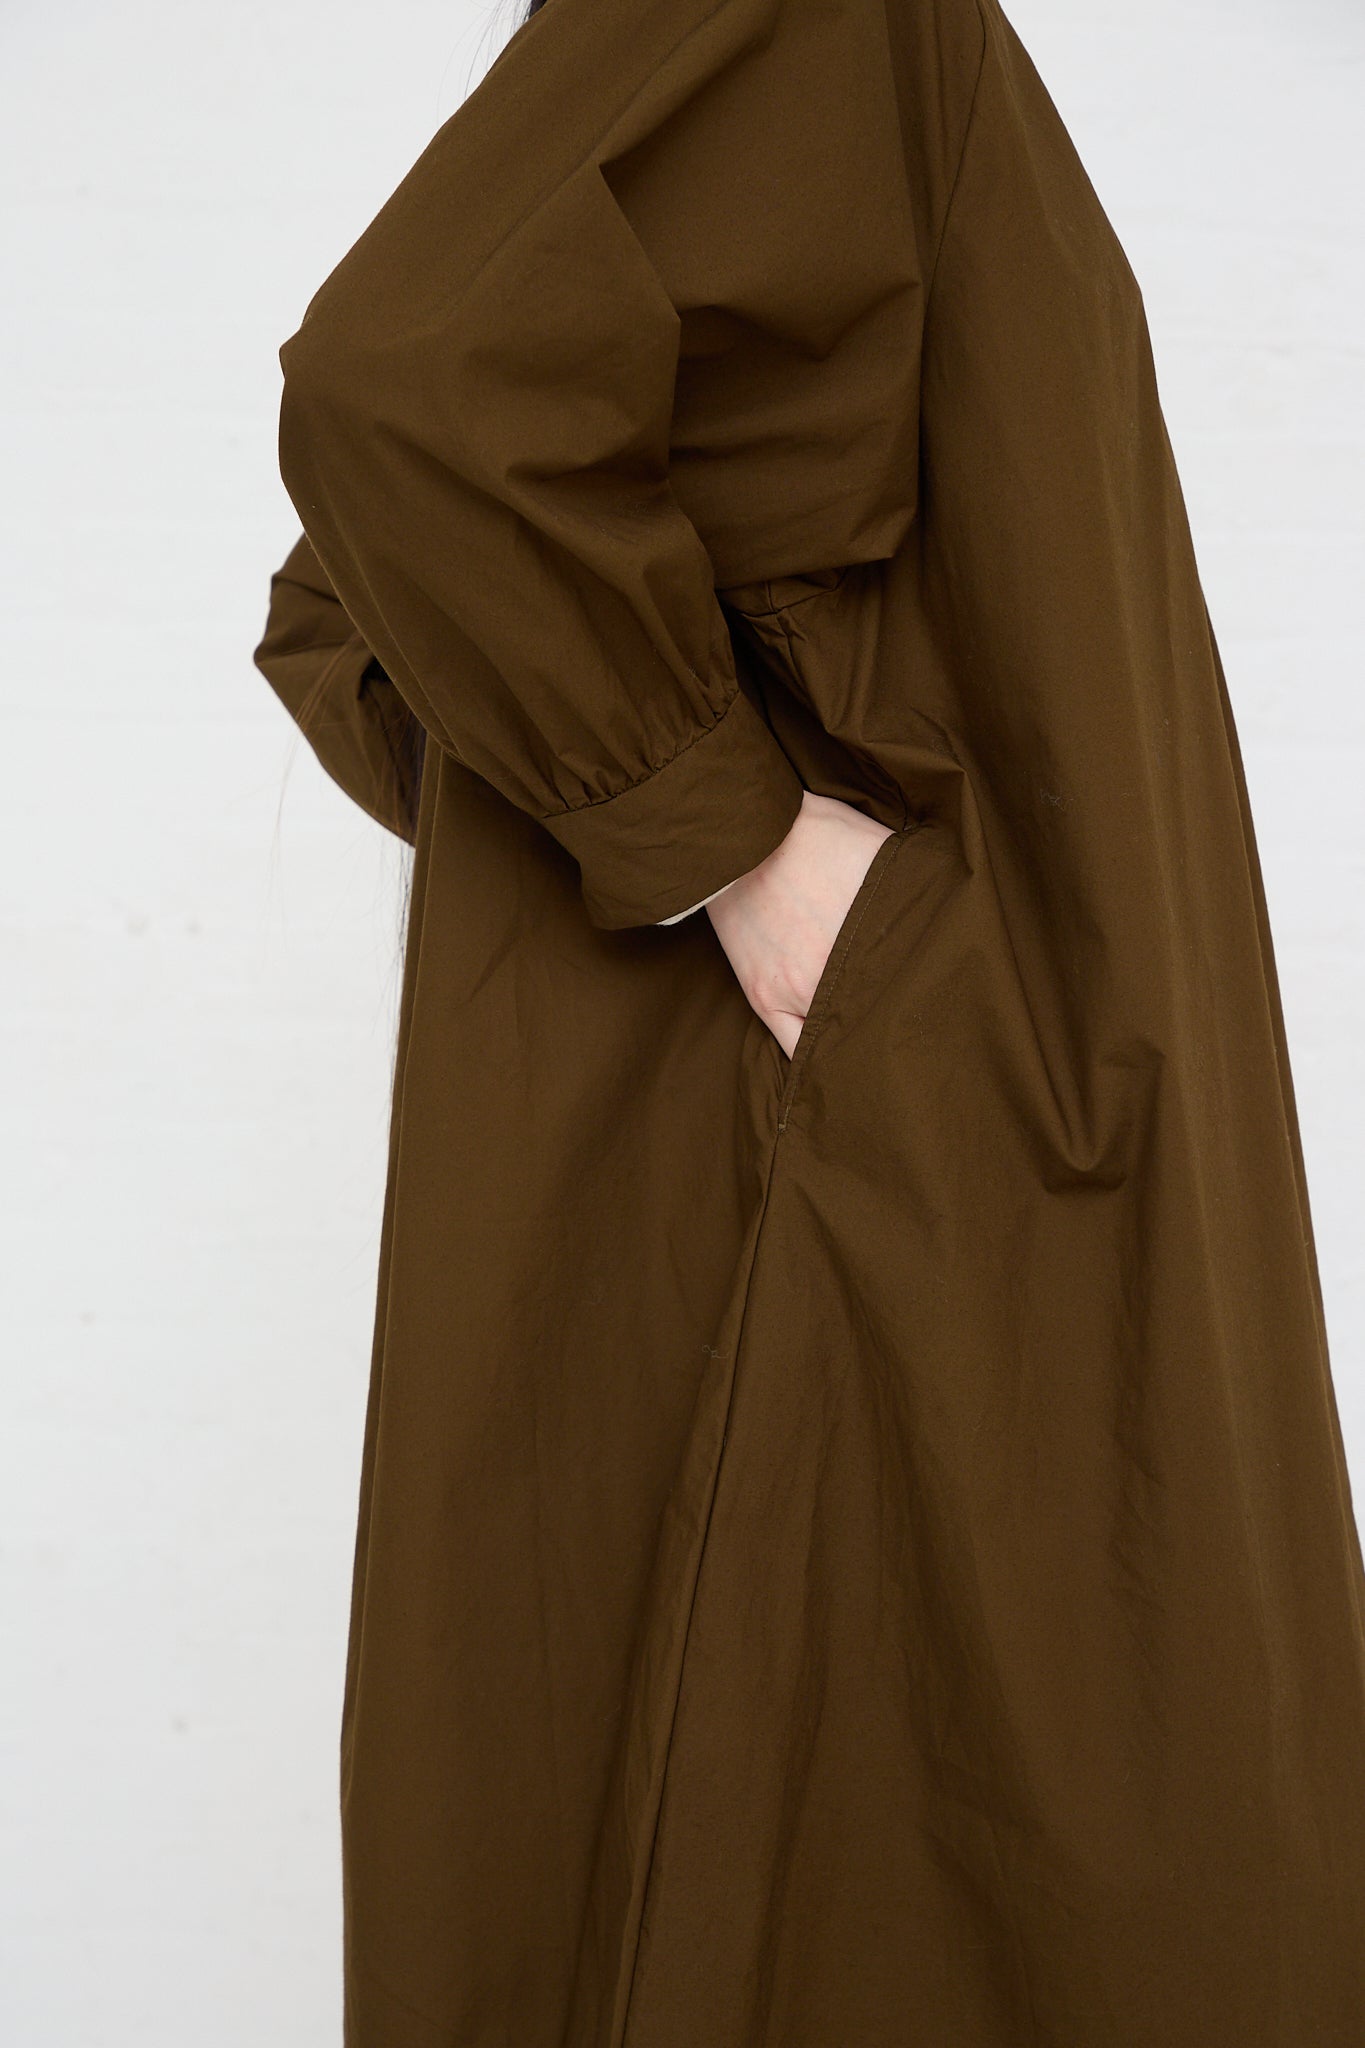 A woman wearing an Ichi Woven Cotton Dress in Seal Brown with pockets. Side view.